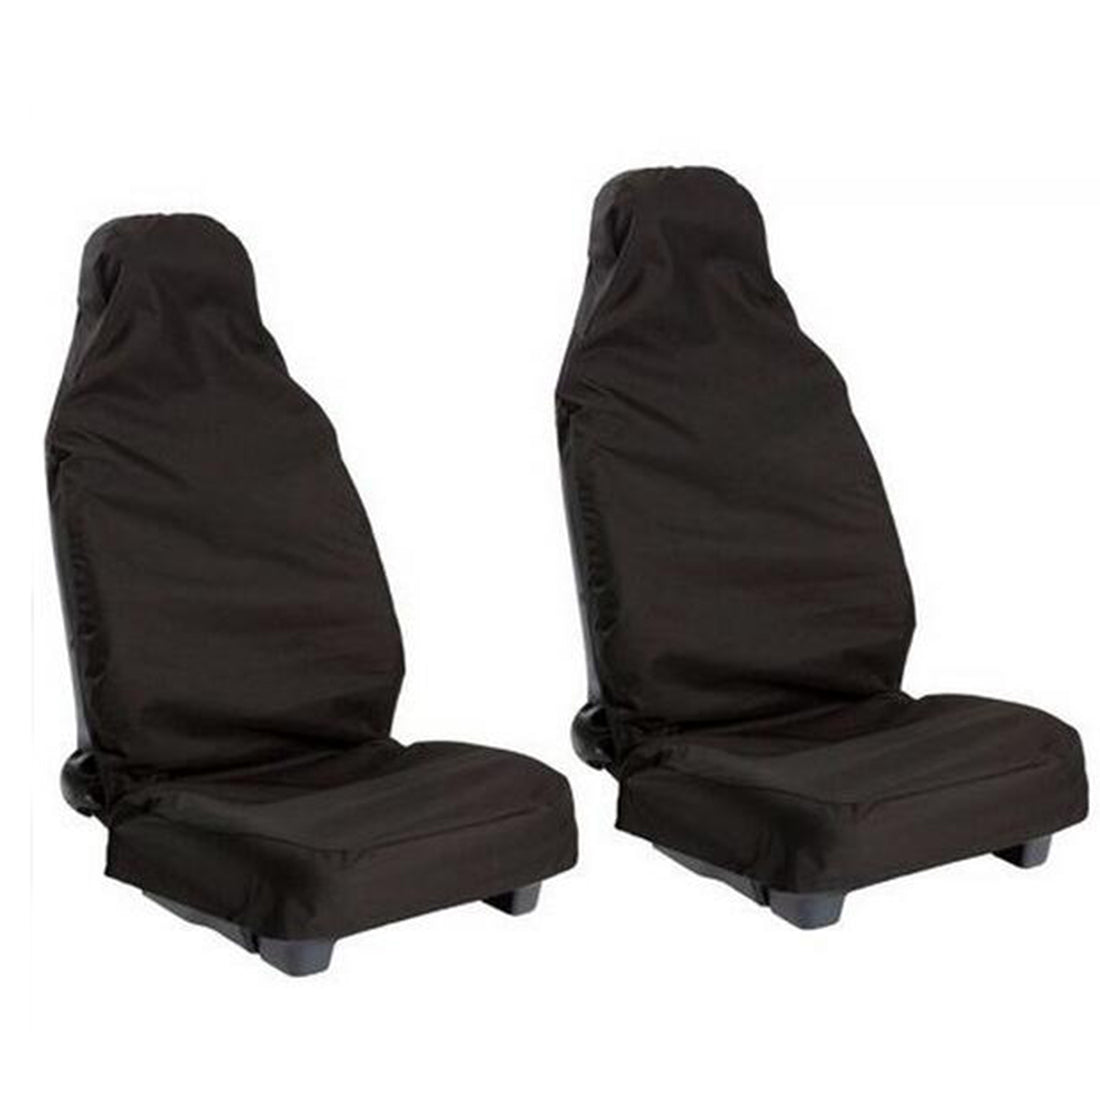 Heavy Duty Nylon Front Seat Covers | 2 Pack - 